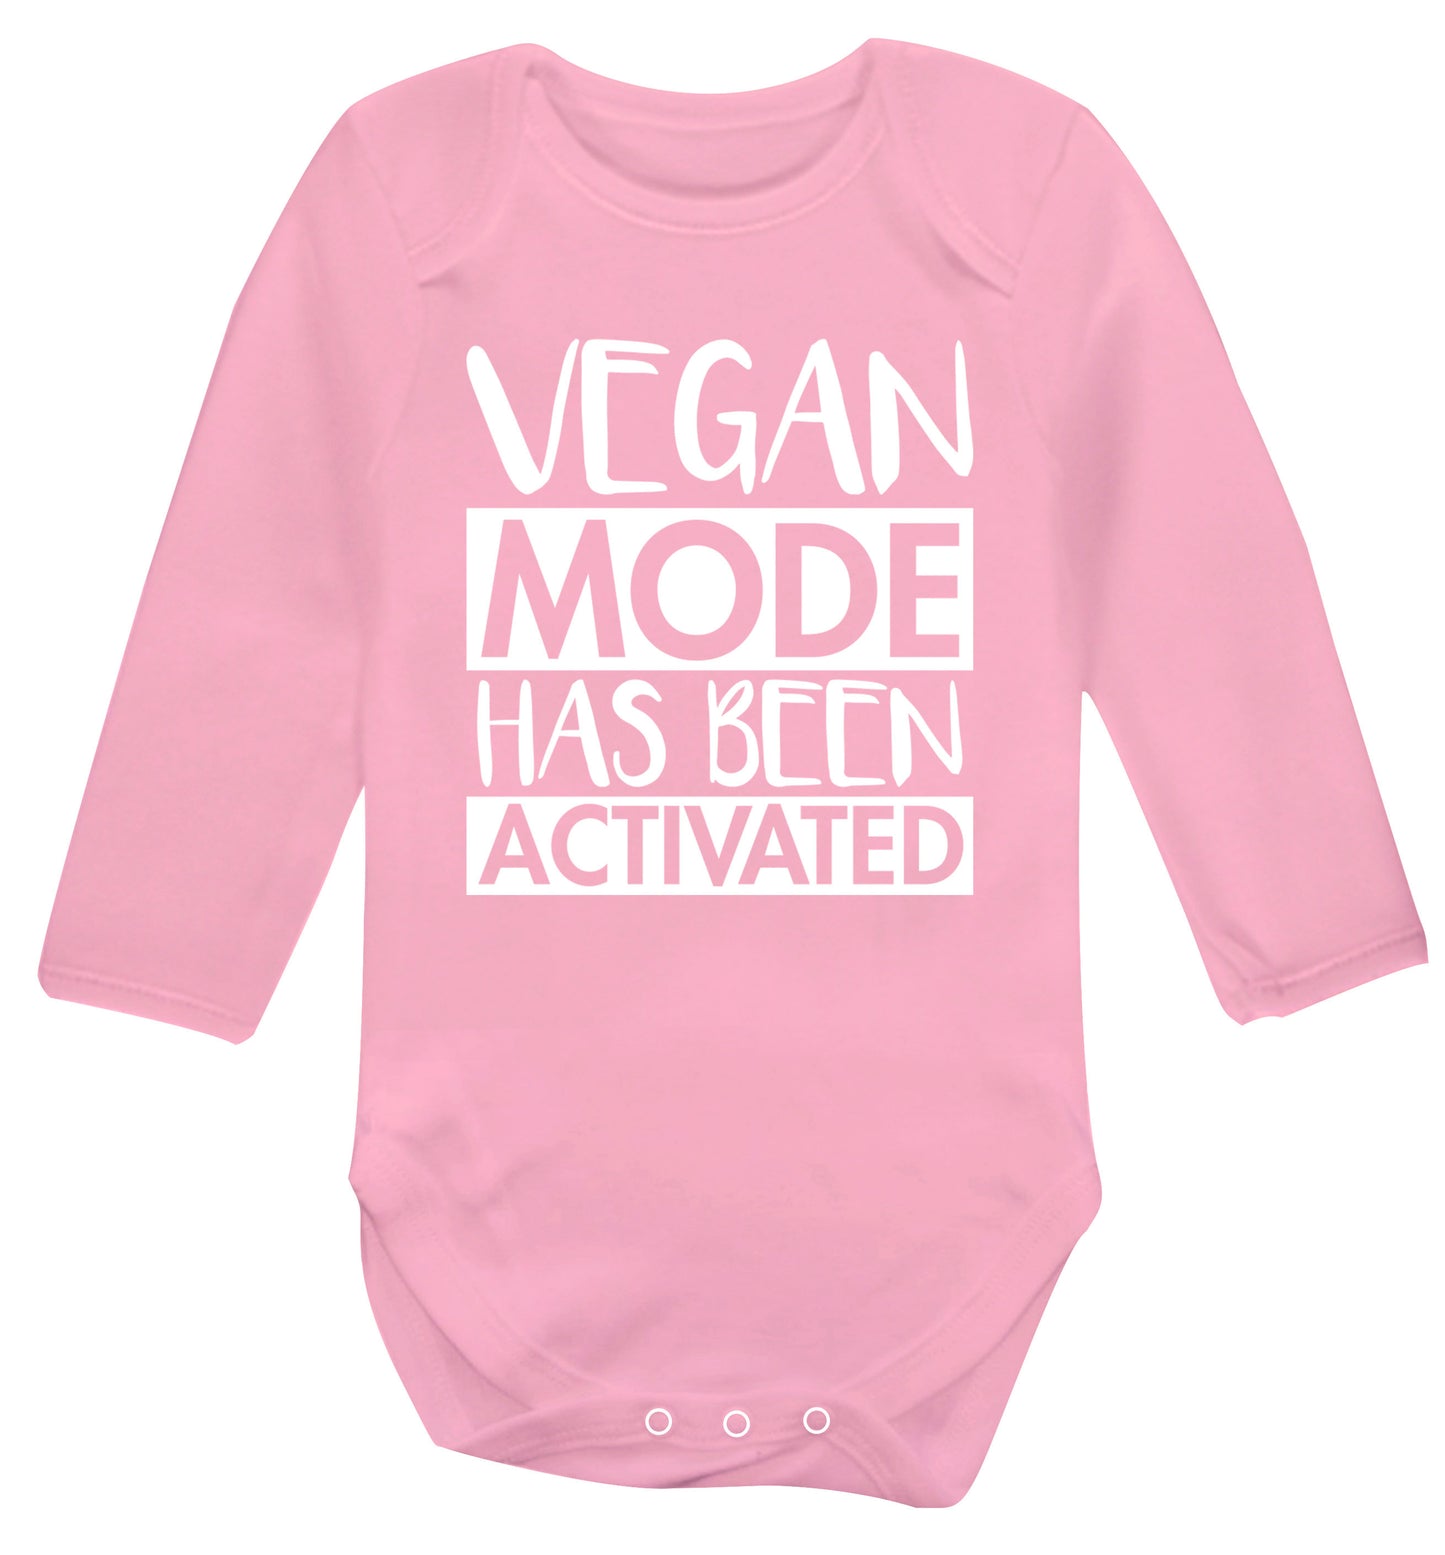 Vegan mode activated Baby Vest long sleeved pale pink 6-12 months